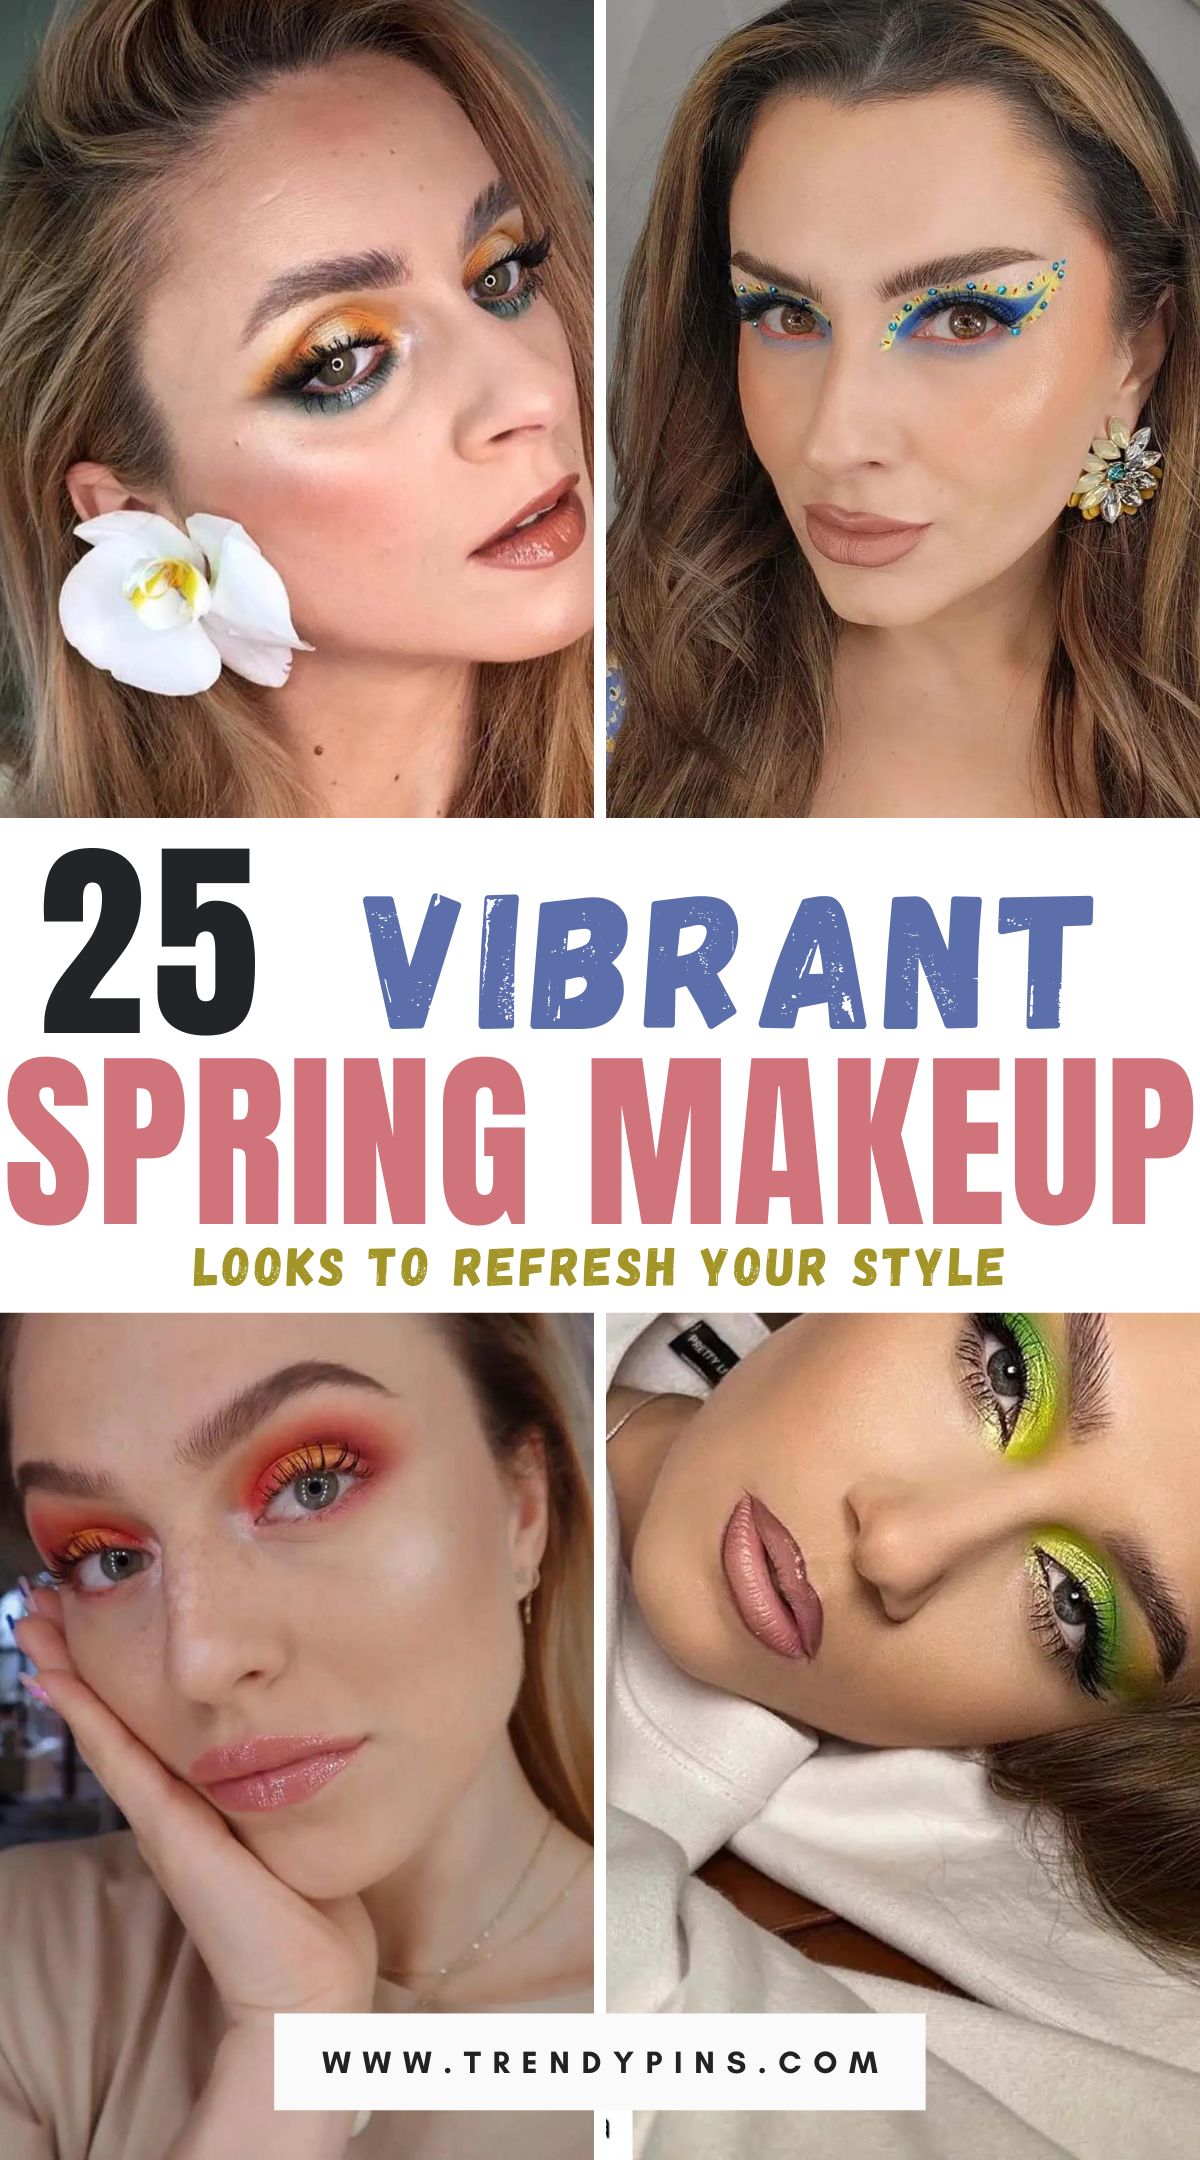 Light up your days with 25 fresh and radiant spring makeup looks. Discover the beauty of vibrant colors and seasonal inspiration to elevate your daily makeup routine.